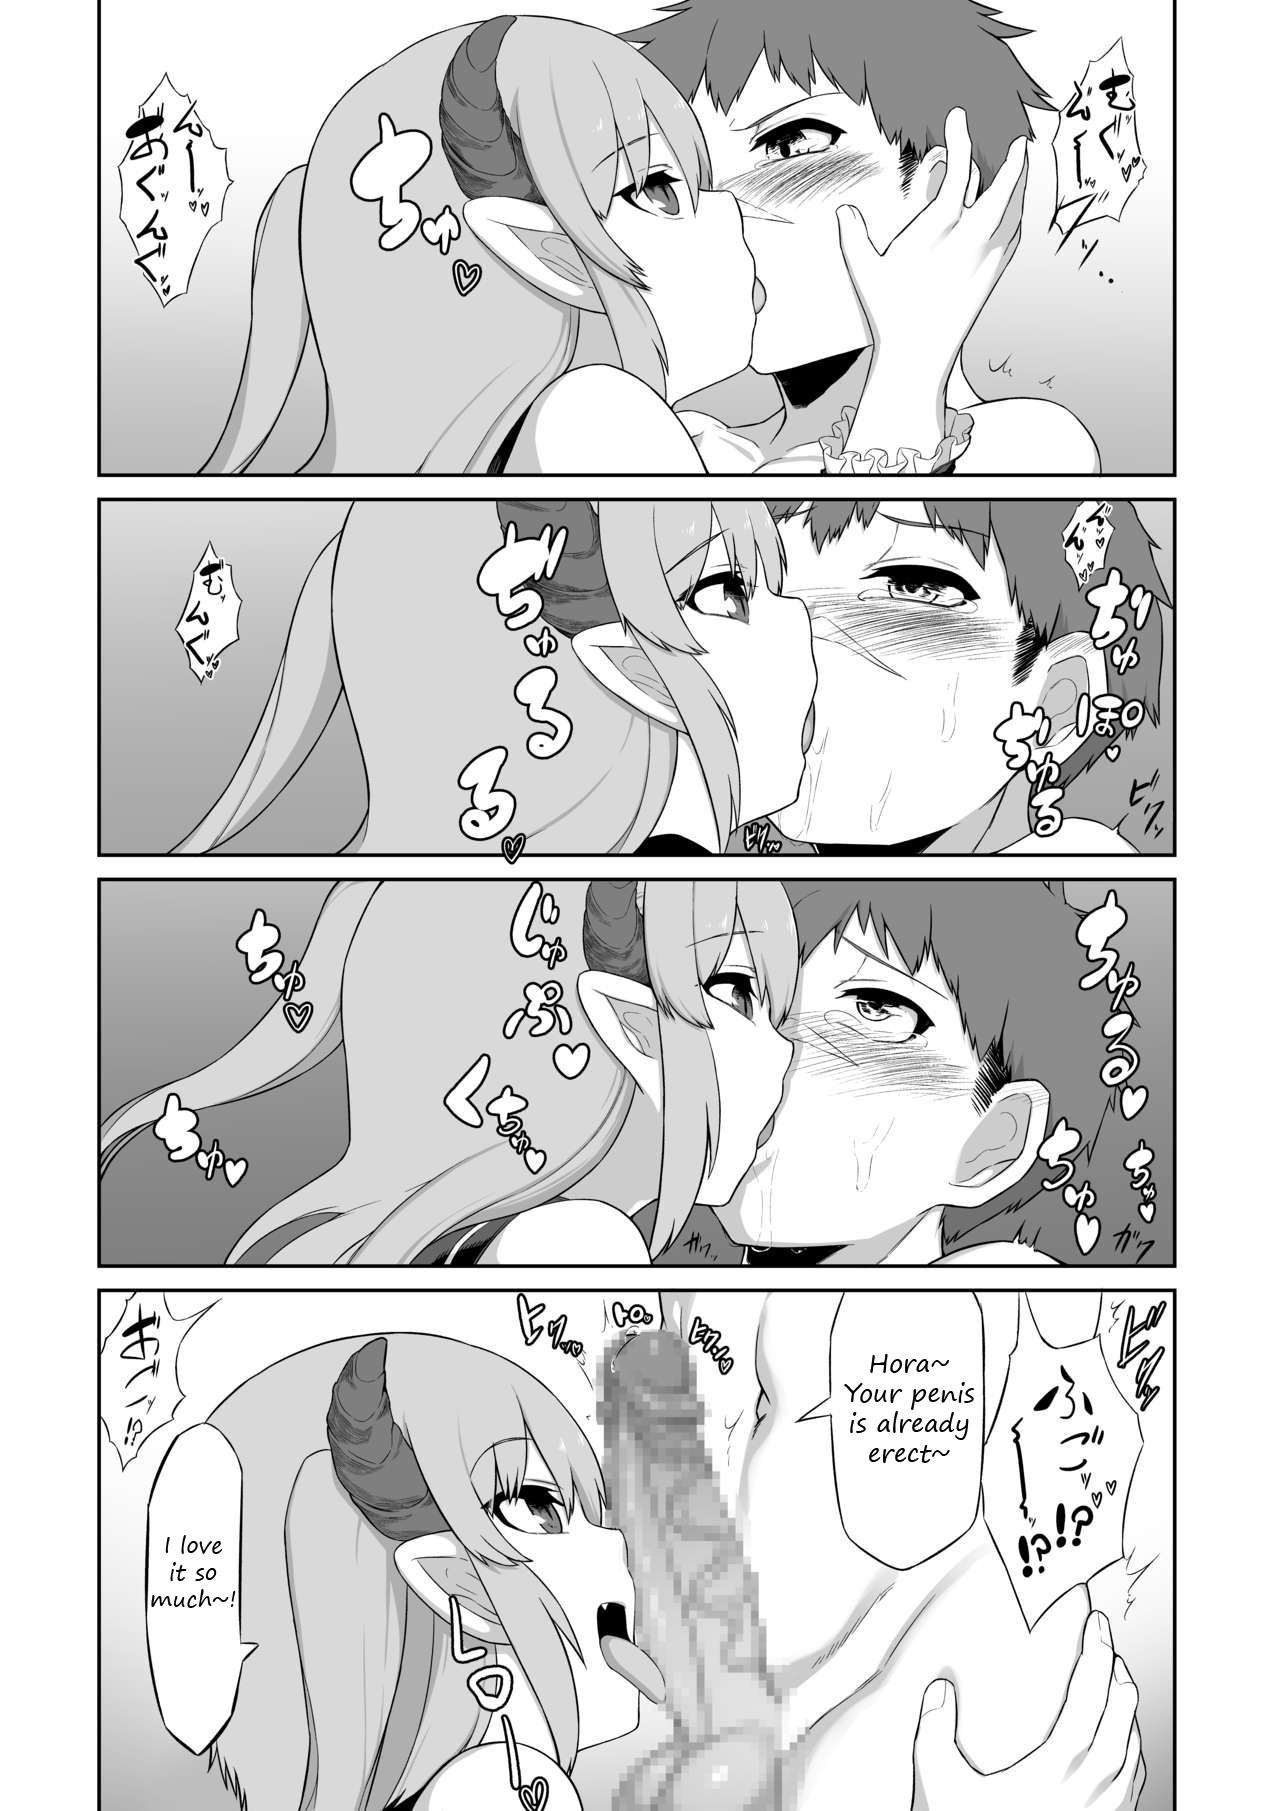 Shecock Futago Succubus to Mahou no Onaho | The Succubus Twins and the Magical Onahole - Original Bwc - Page 8